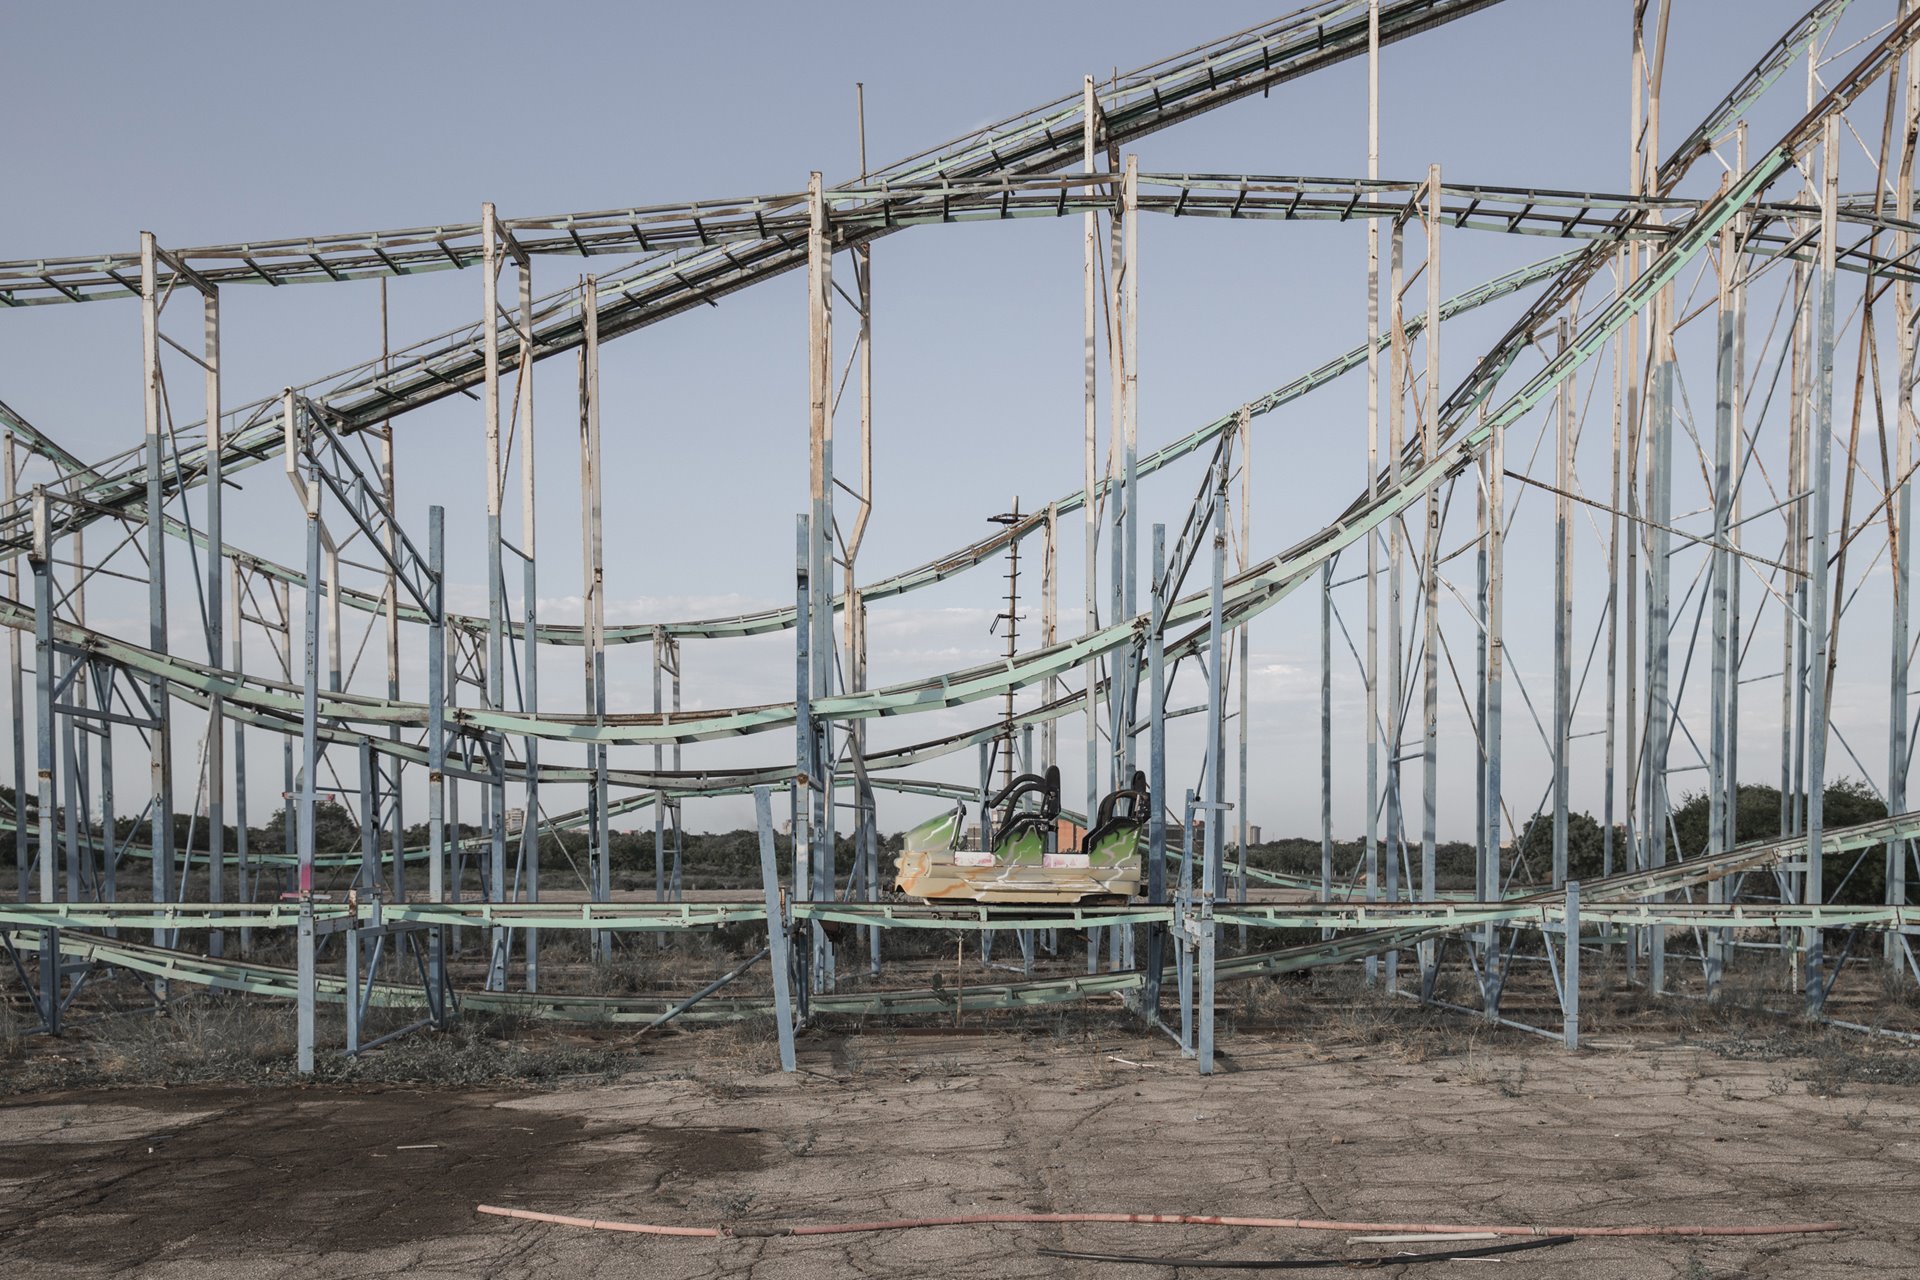 A roller coaster lies abandoned at the derelict Grano de Oro theme park in Maracaibo, Zulia State, Venezuela. Maracaibo was once one of the richest cities in Venezuela, deriving wealth from its oil facilities. However, by 2021, 49.6% of households in Zulia had a monthly income of just US$11-US$50, according to local human rights organization CODHEZ.